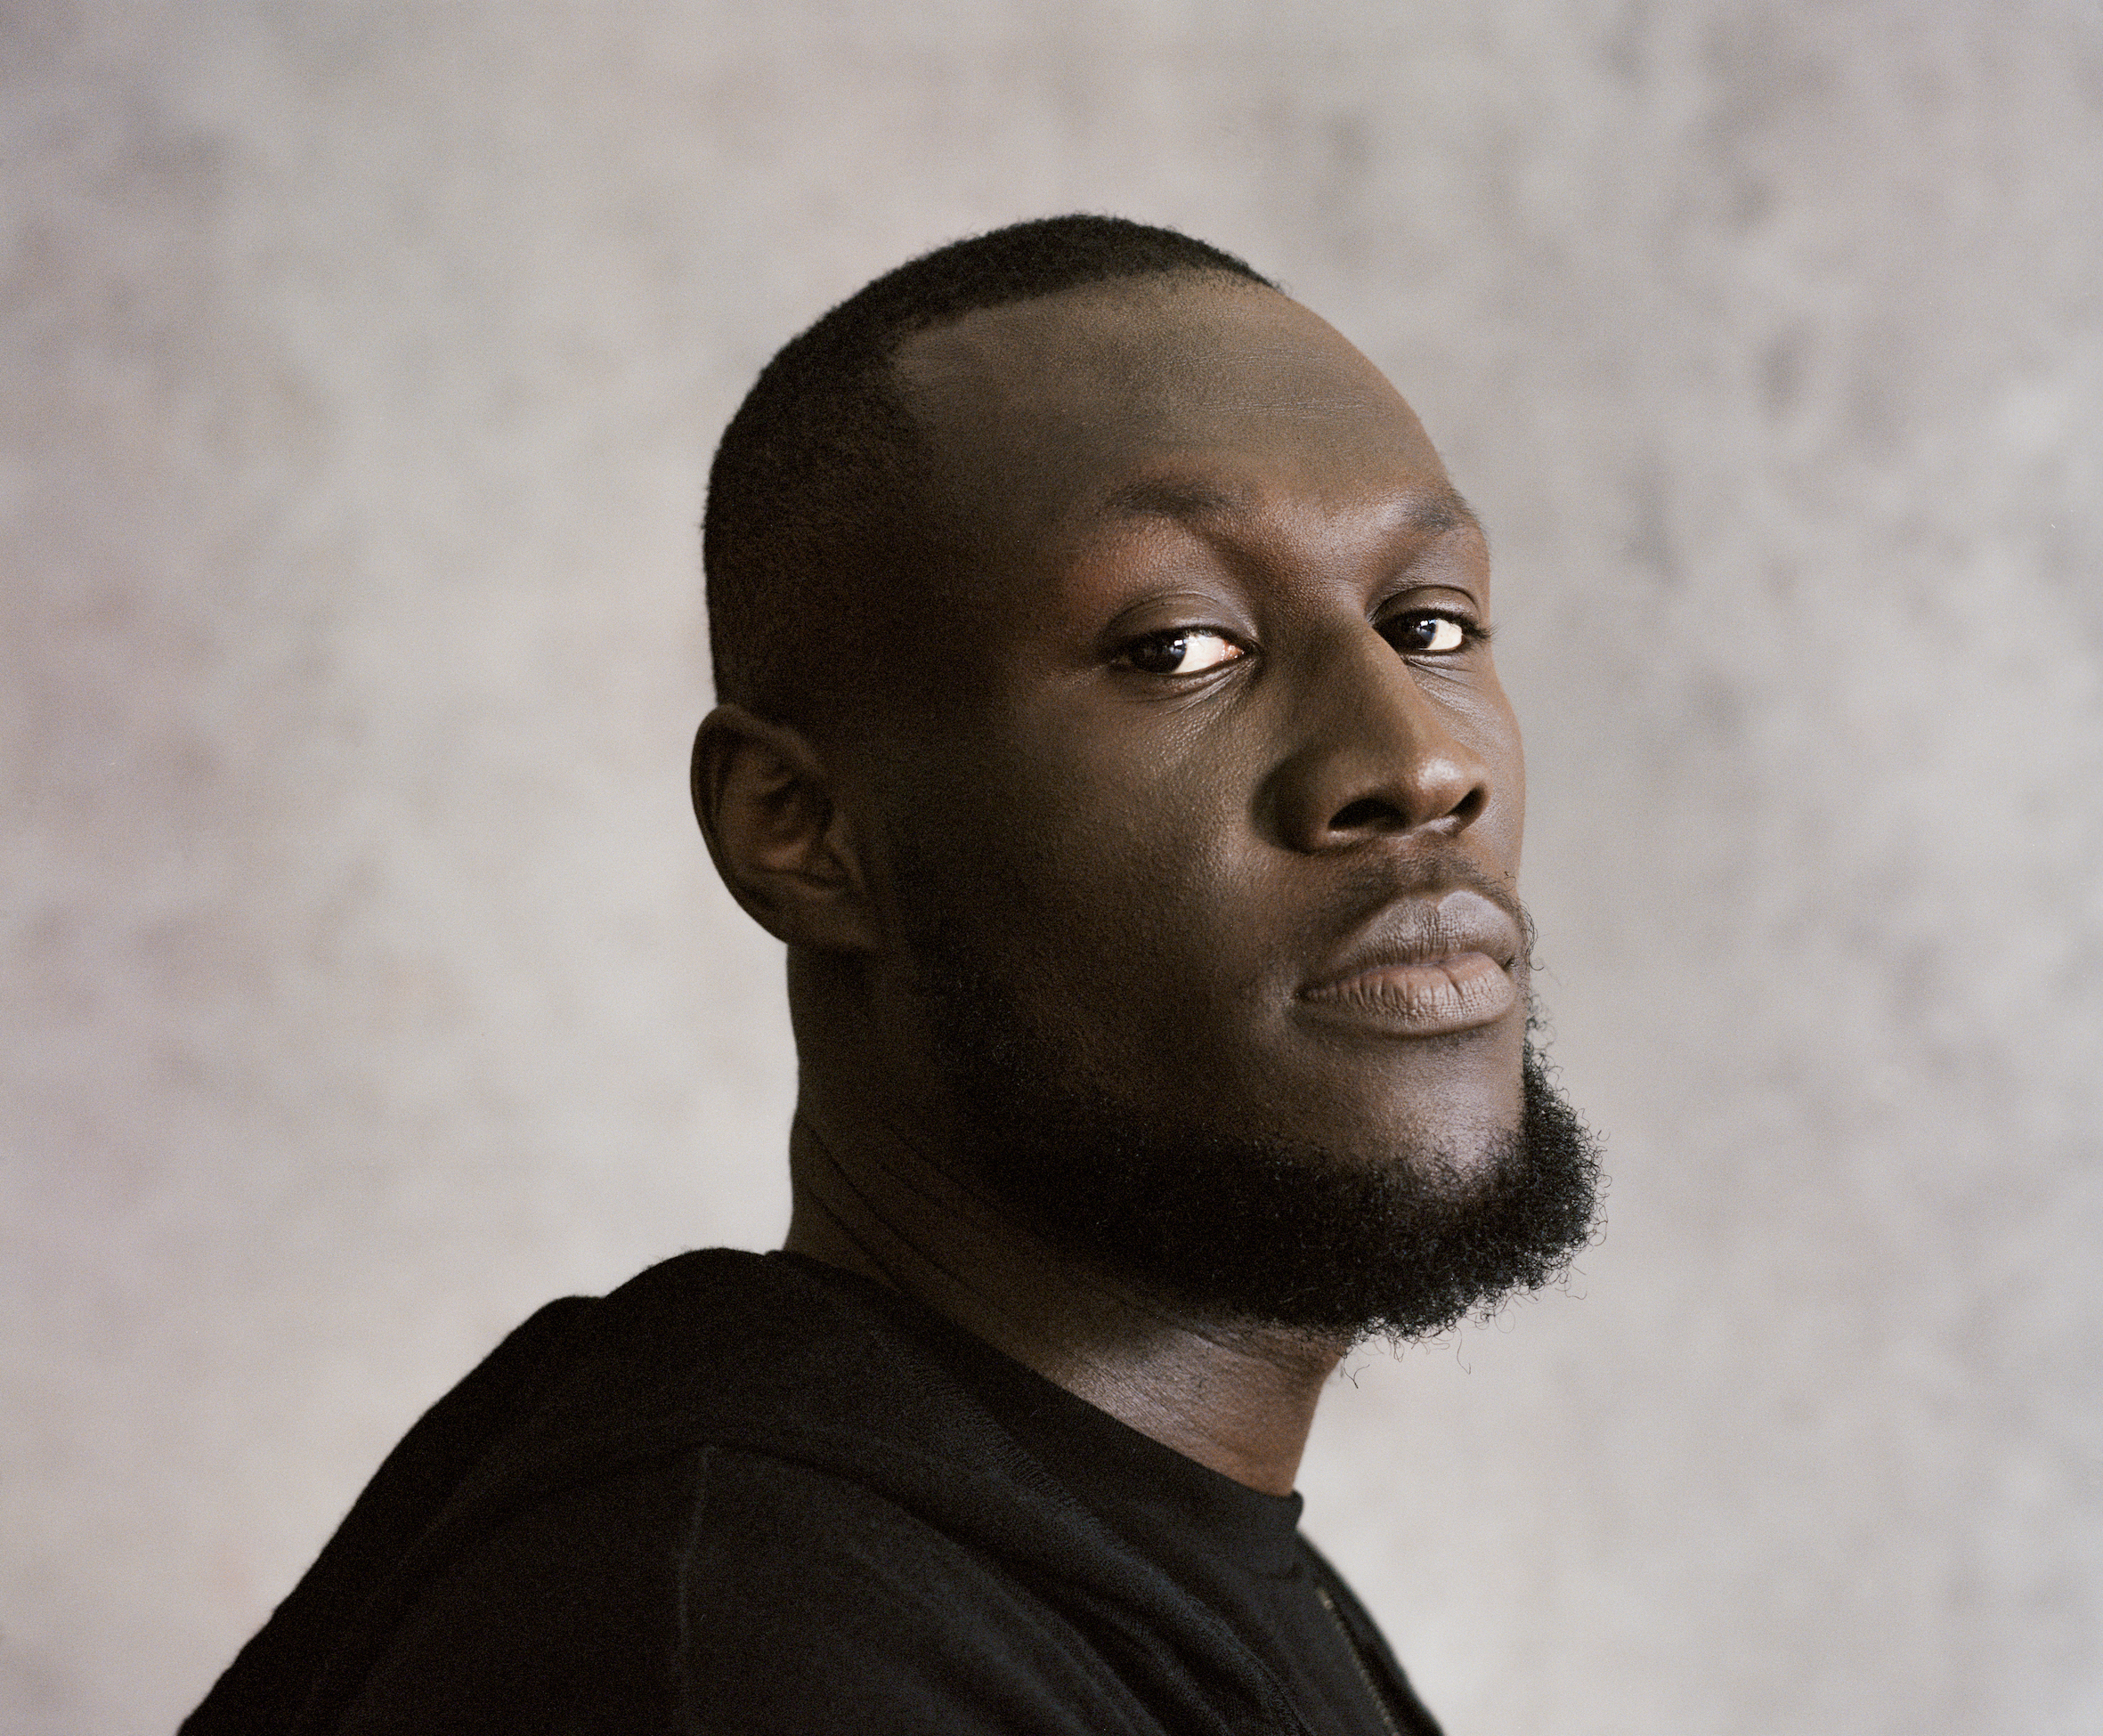 Head and shoulders picture of Stormzy, wearing a black t-shirt and top.